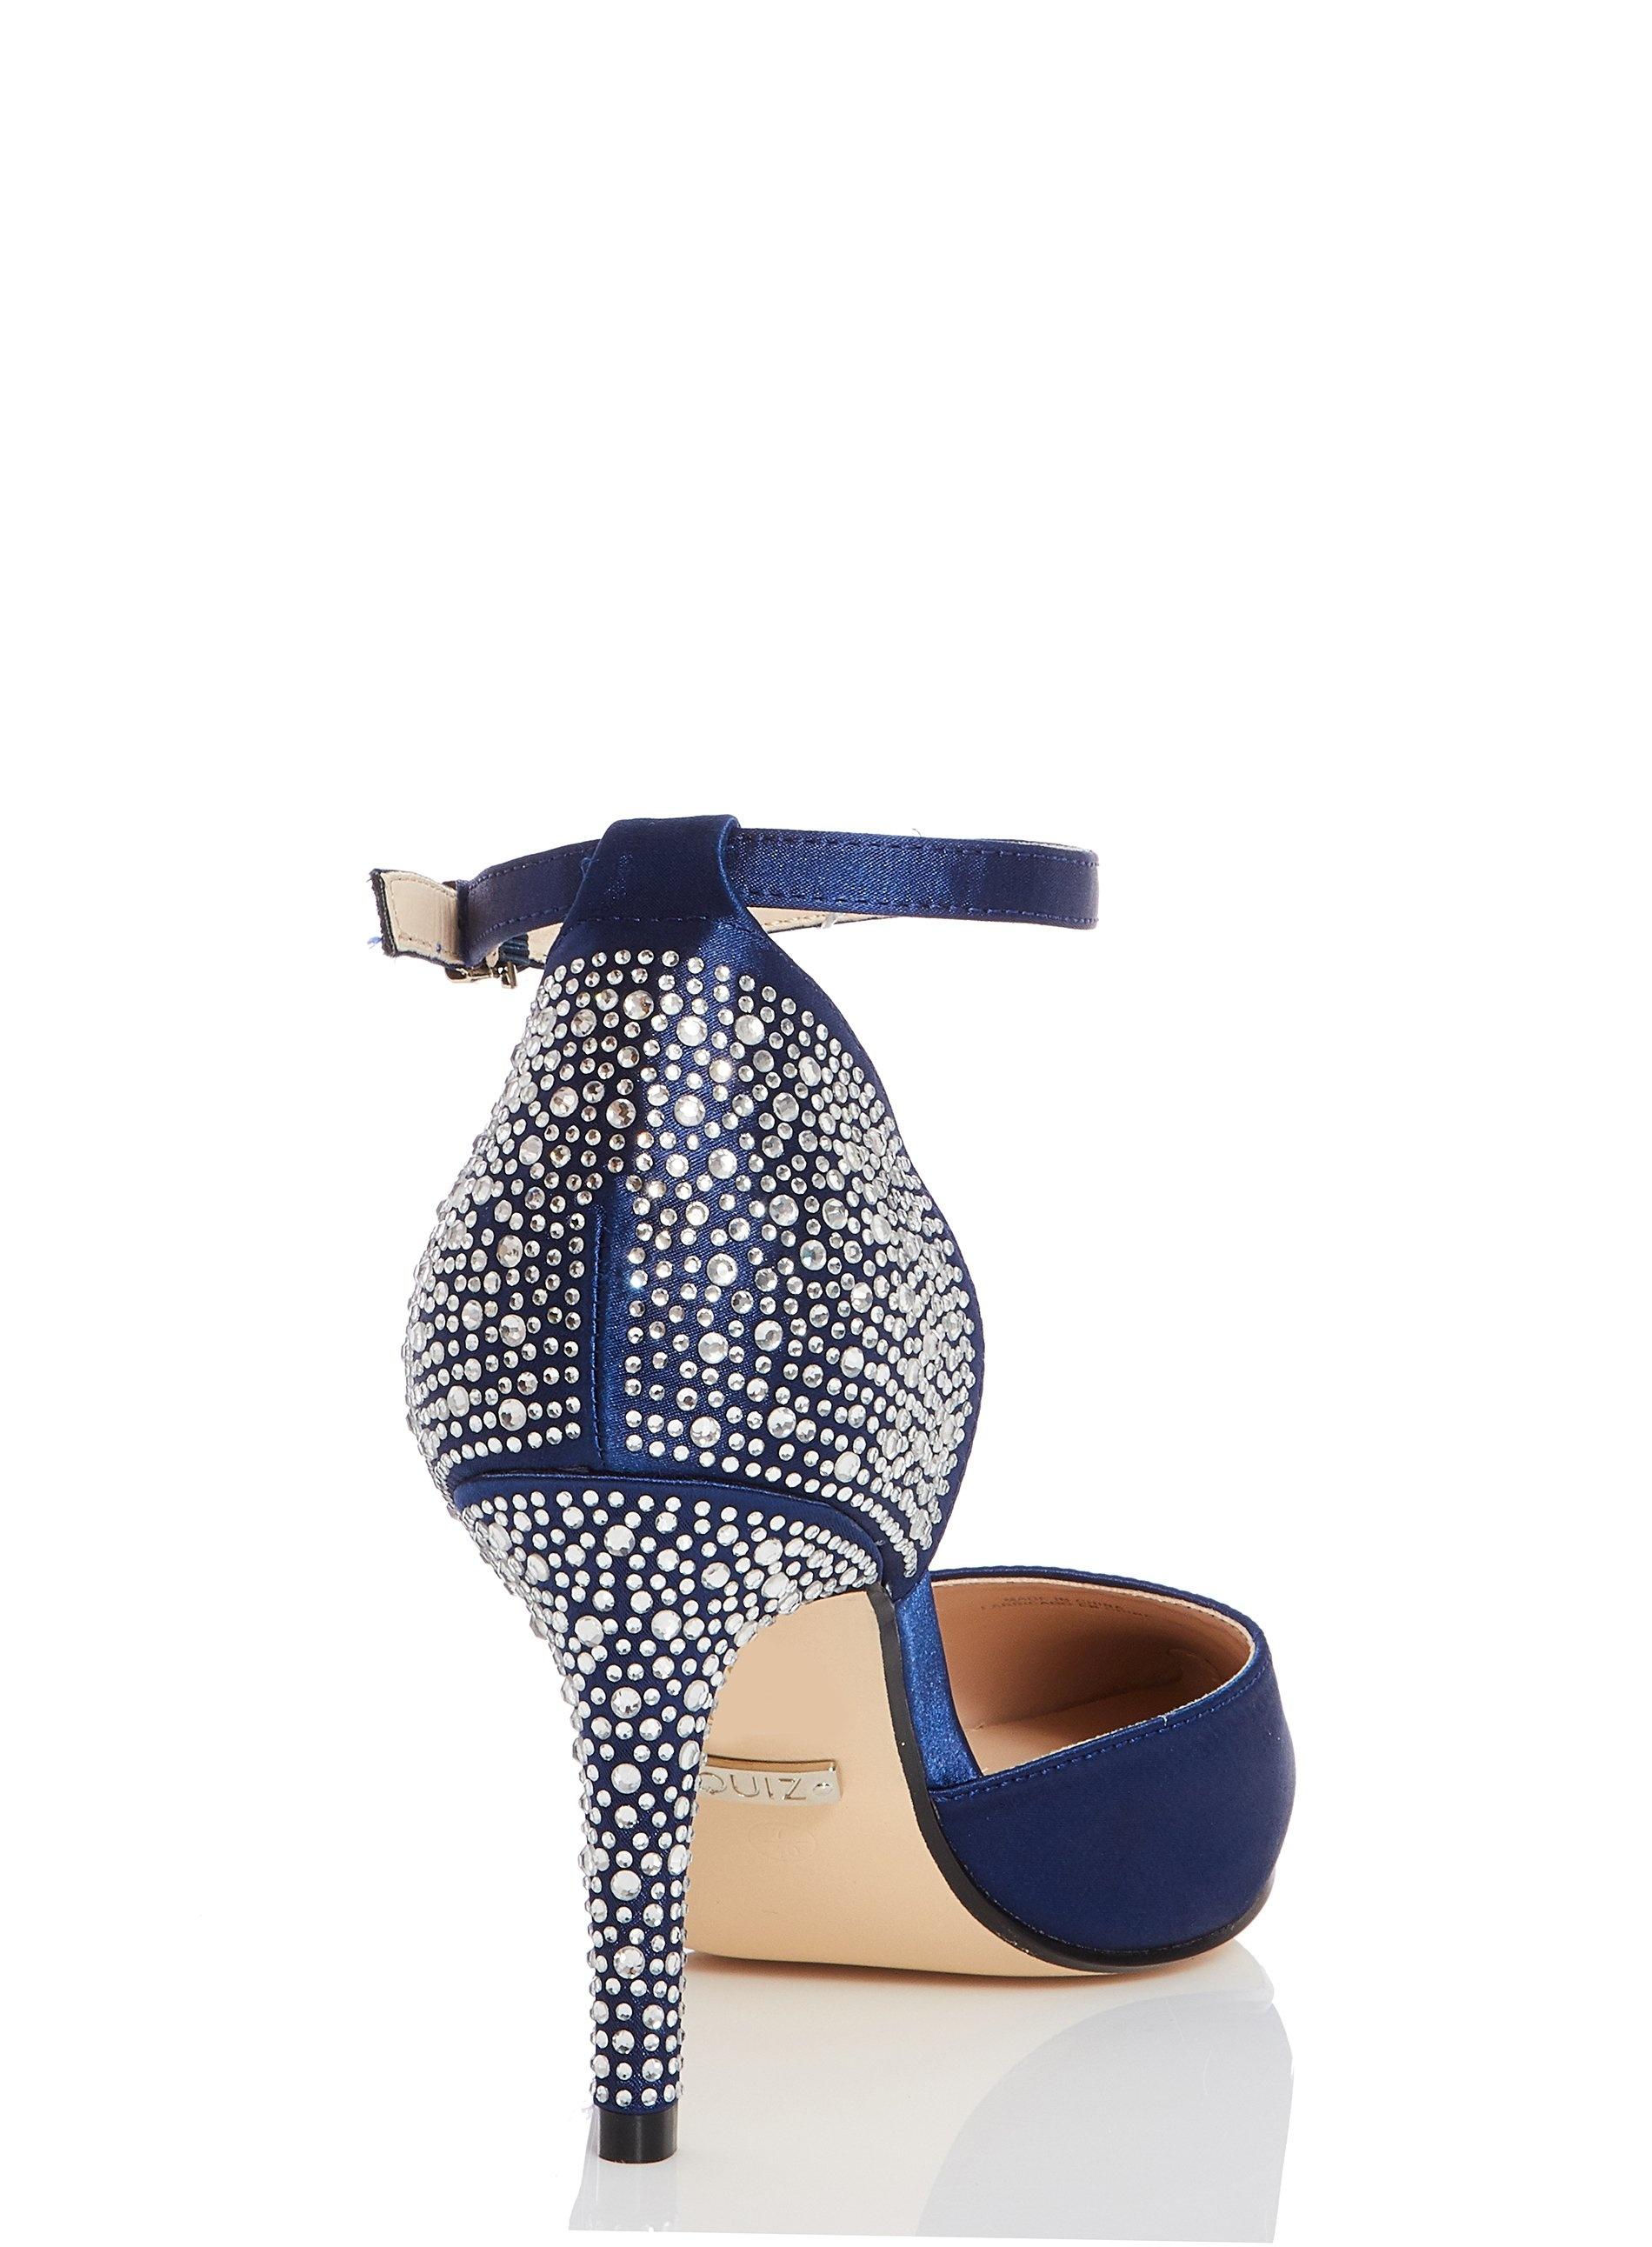 navy satin shoes with diamante